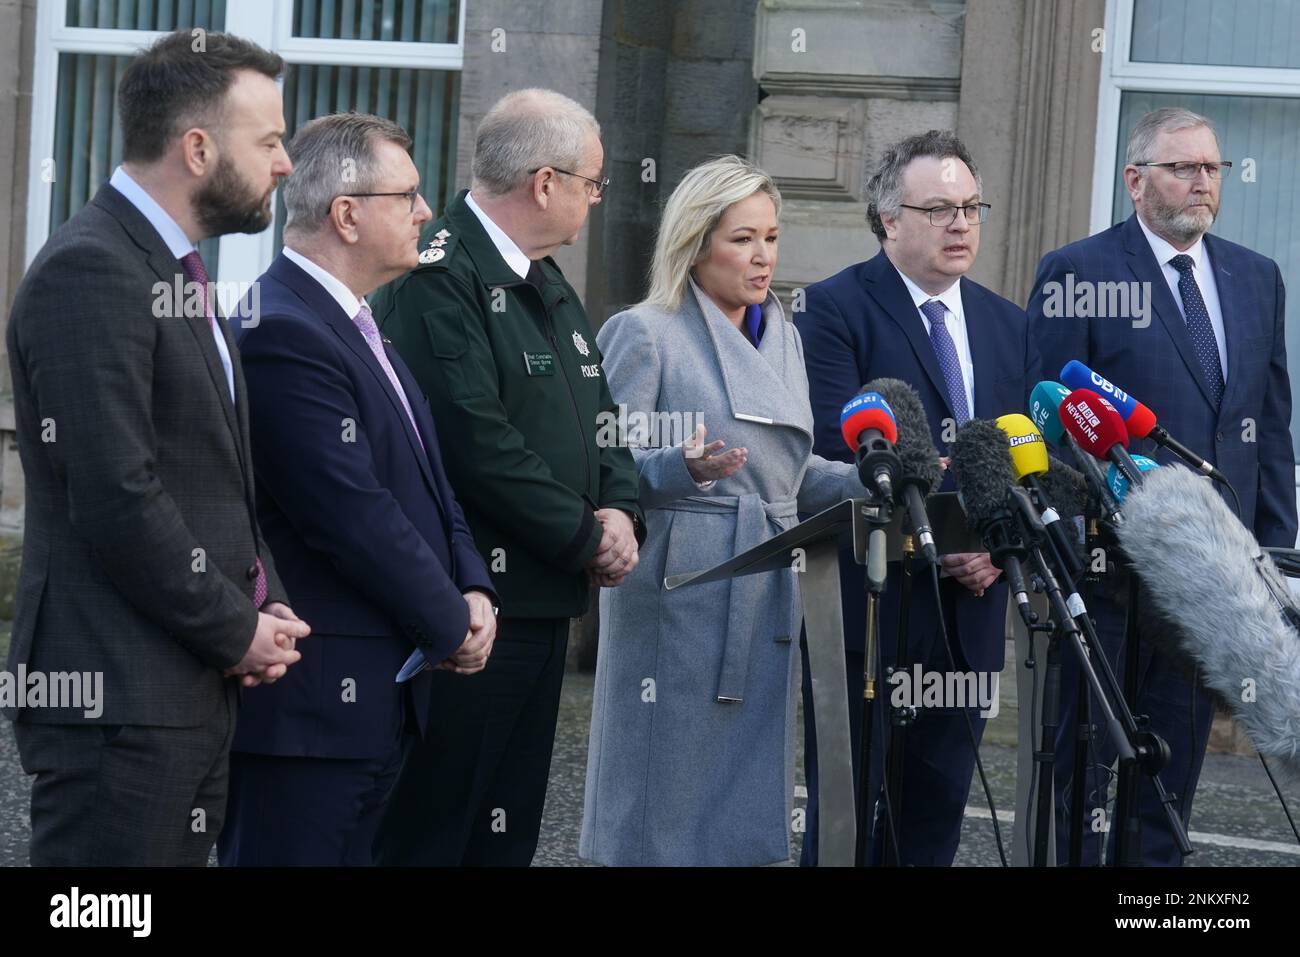 (left to right) SDLP leader Colum Eastwood, DUP leader Jeffrey Donaldson, Police Service of Northern Ireland (PSNI) Chief Constable Simon Byrne, Sinn Fein deputy leader Michelle O'Neill, Stephen Farry from the Alliance party, and Ulster Unionist Party (UUP) leader Doug Beattie, speaking to the media outside the PSNI HQ in Belfast, where they are meeting following the shooting of PSNI Detective Chief Inspector John Caldwell on Wednesday. Picture date: Friday February 24, 2023. Stock Photo